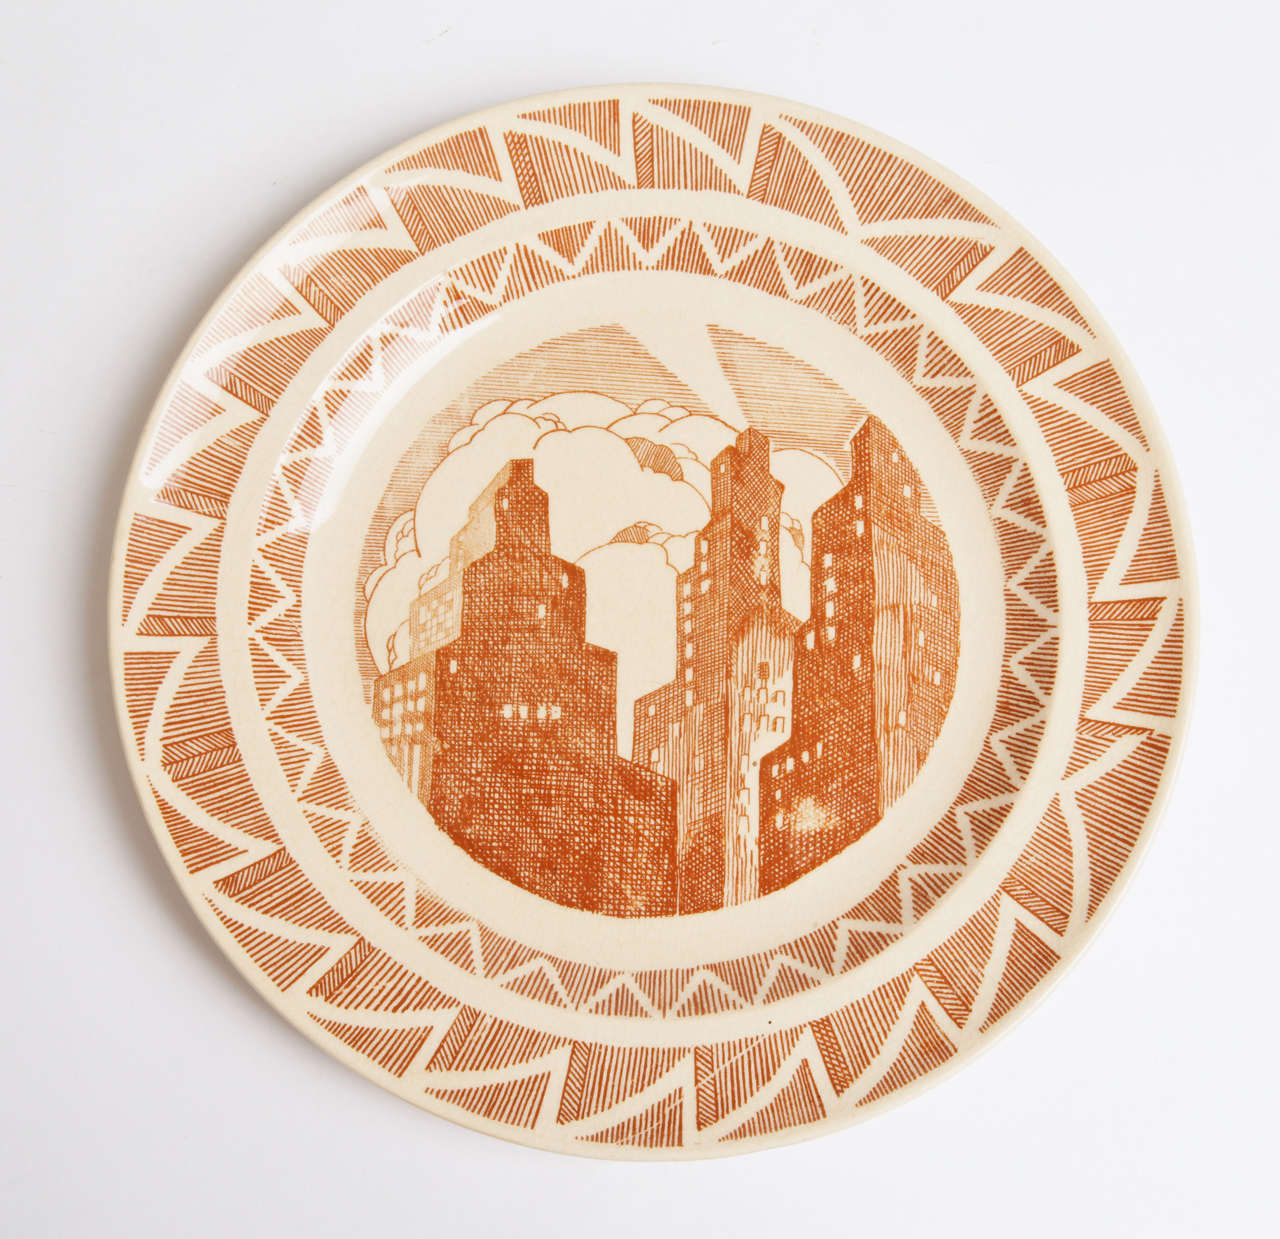 Important Art Deco skyscraper plate, Gale Turnbull for Leigh Potters, circa 1929

Truly rare example of the early American skyscraper design motif, typically found only in the wood-cut machine age art renderings by Howard Cook and reminiscent of